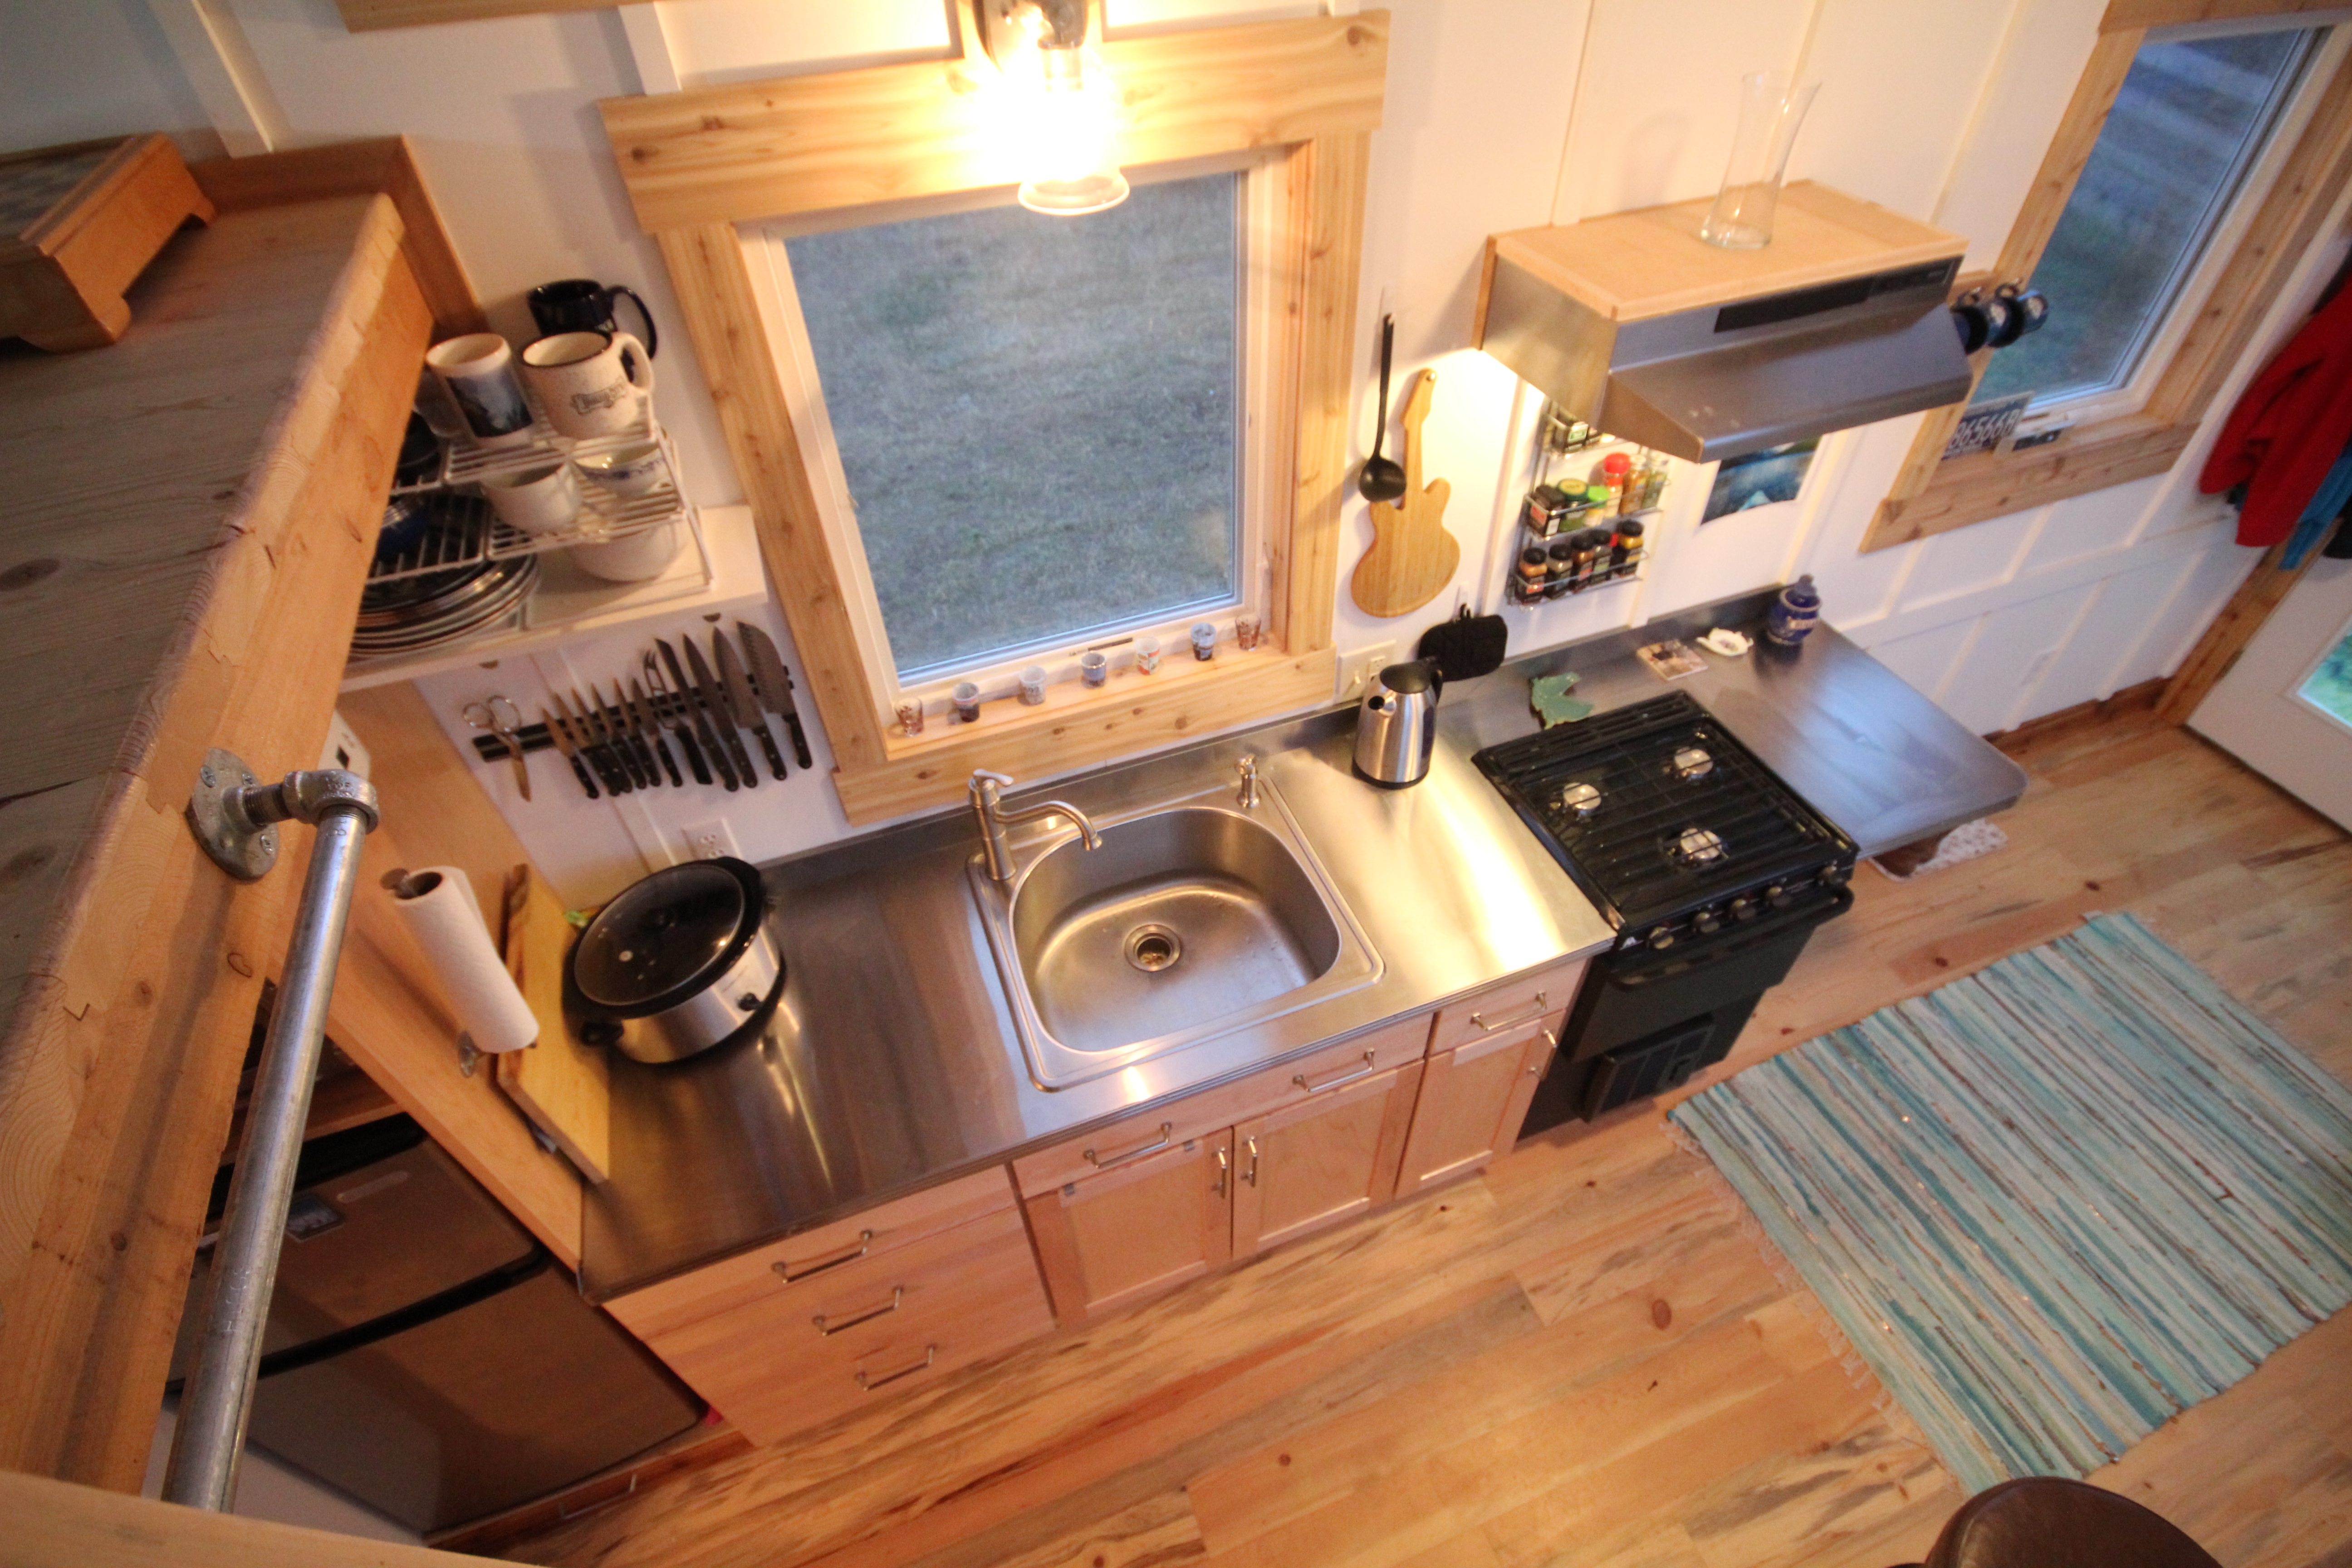 SMALL BUT FUNCTIONAL GALLEY KITCHEN